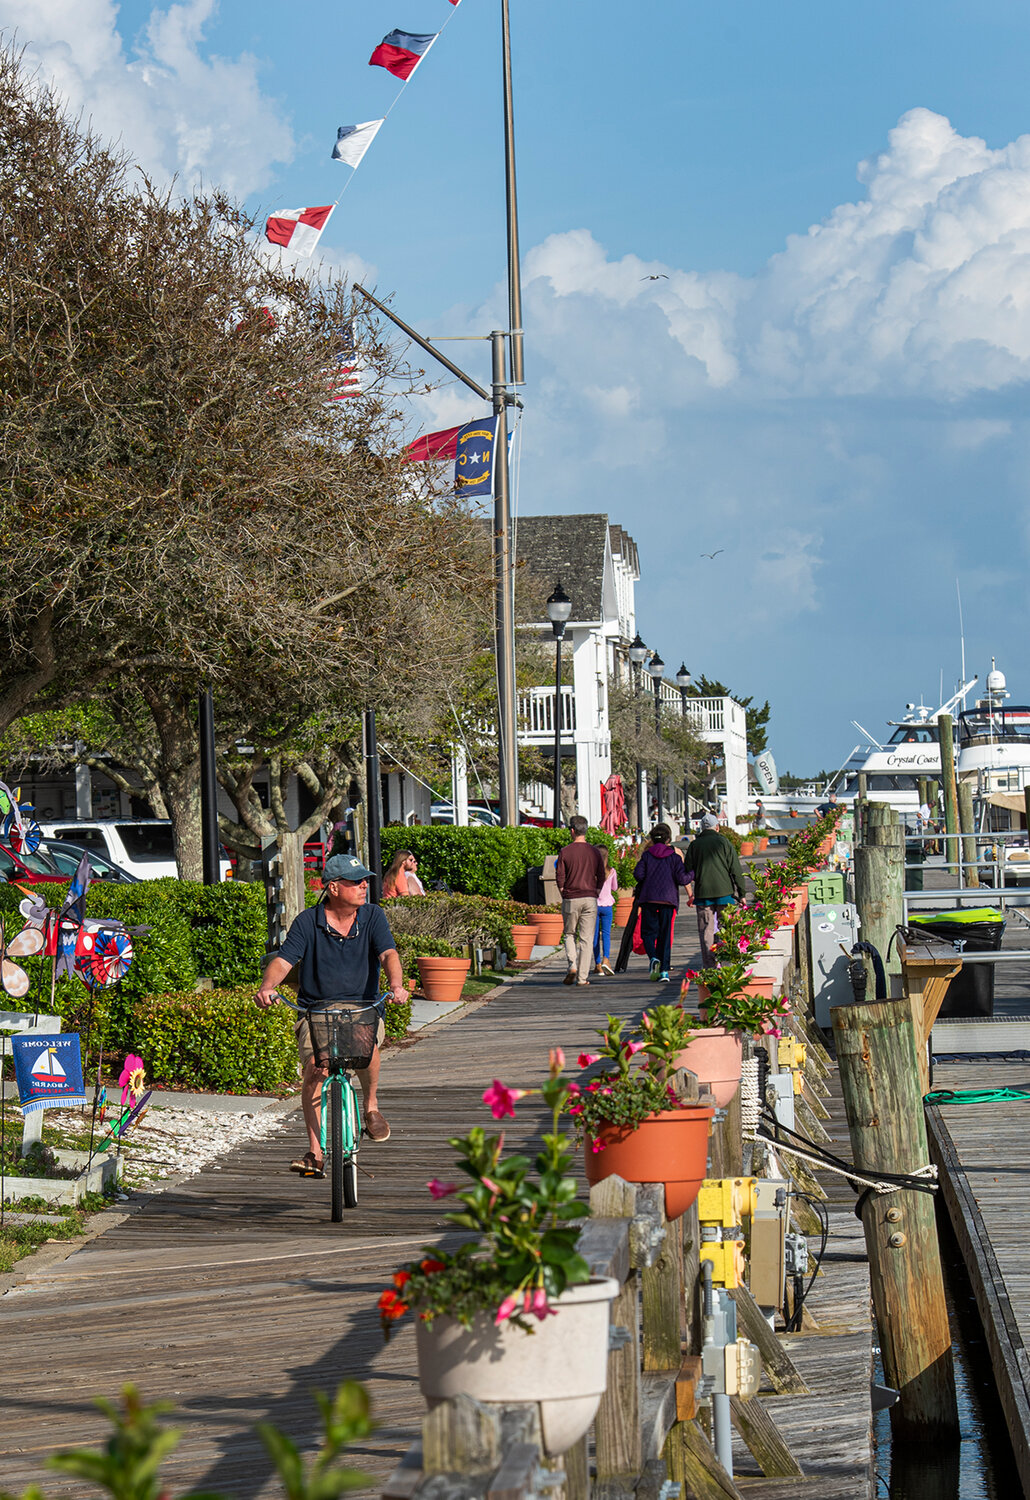 Lee Norris takes a ride on the boardwalk in historic Beaufort ‘just to see if the water was still there,’ he quips. Boutiques, bookstores and sweet shops give the town established in 1713 a homey feel.